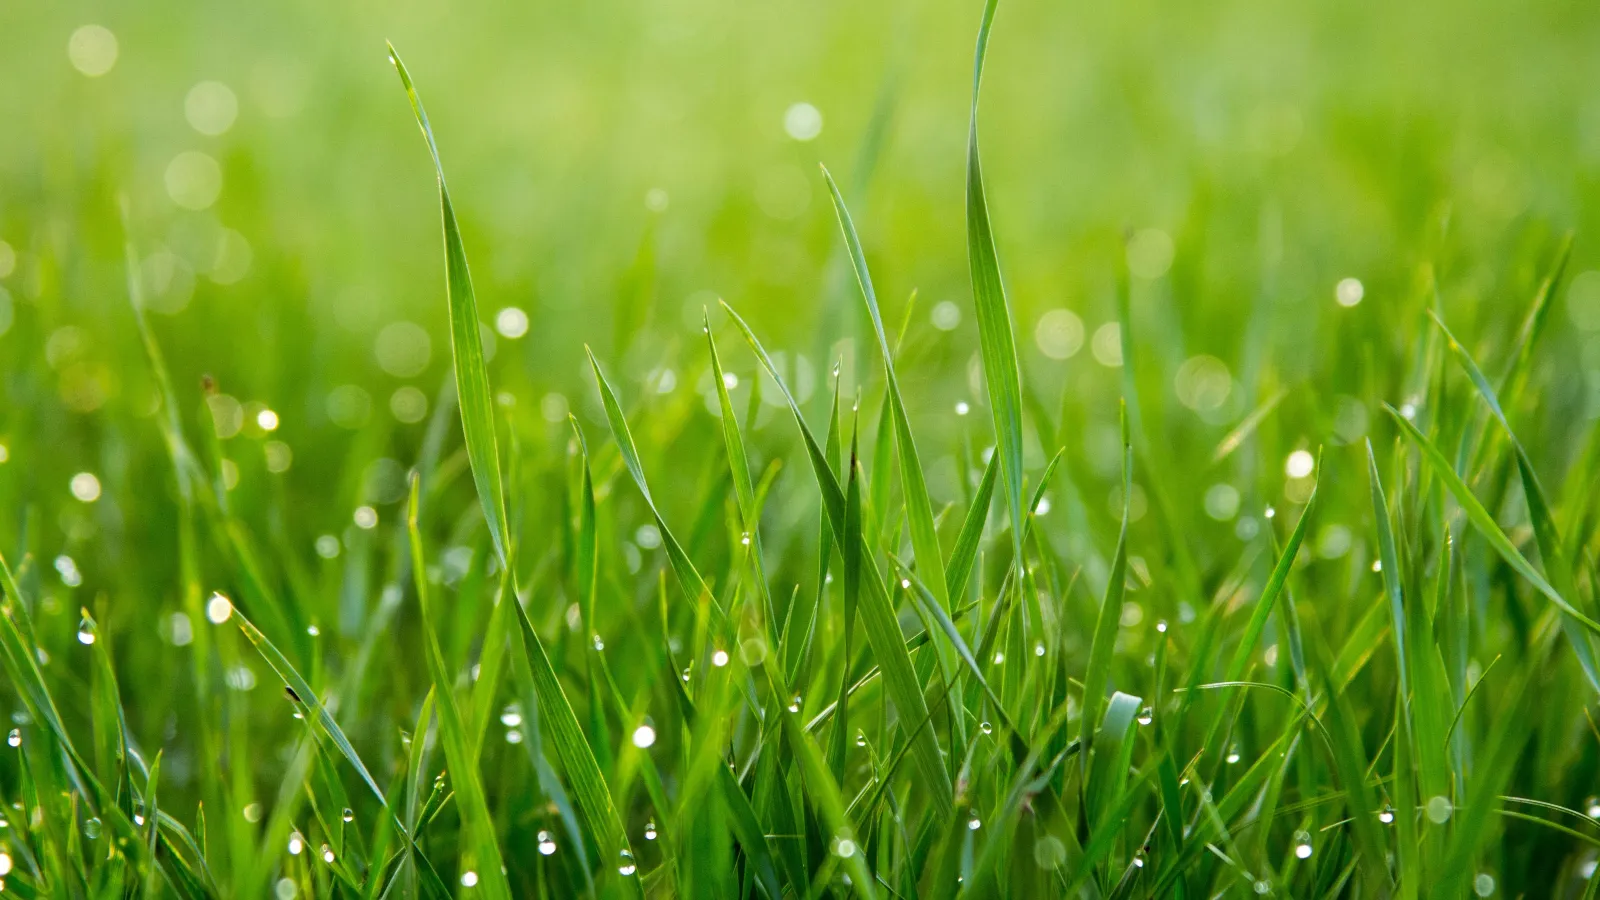 pretty Grass with water droplets on the blades